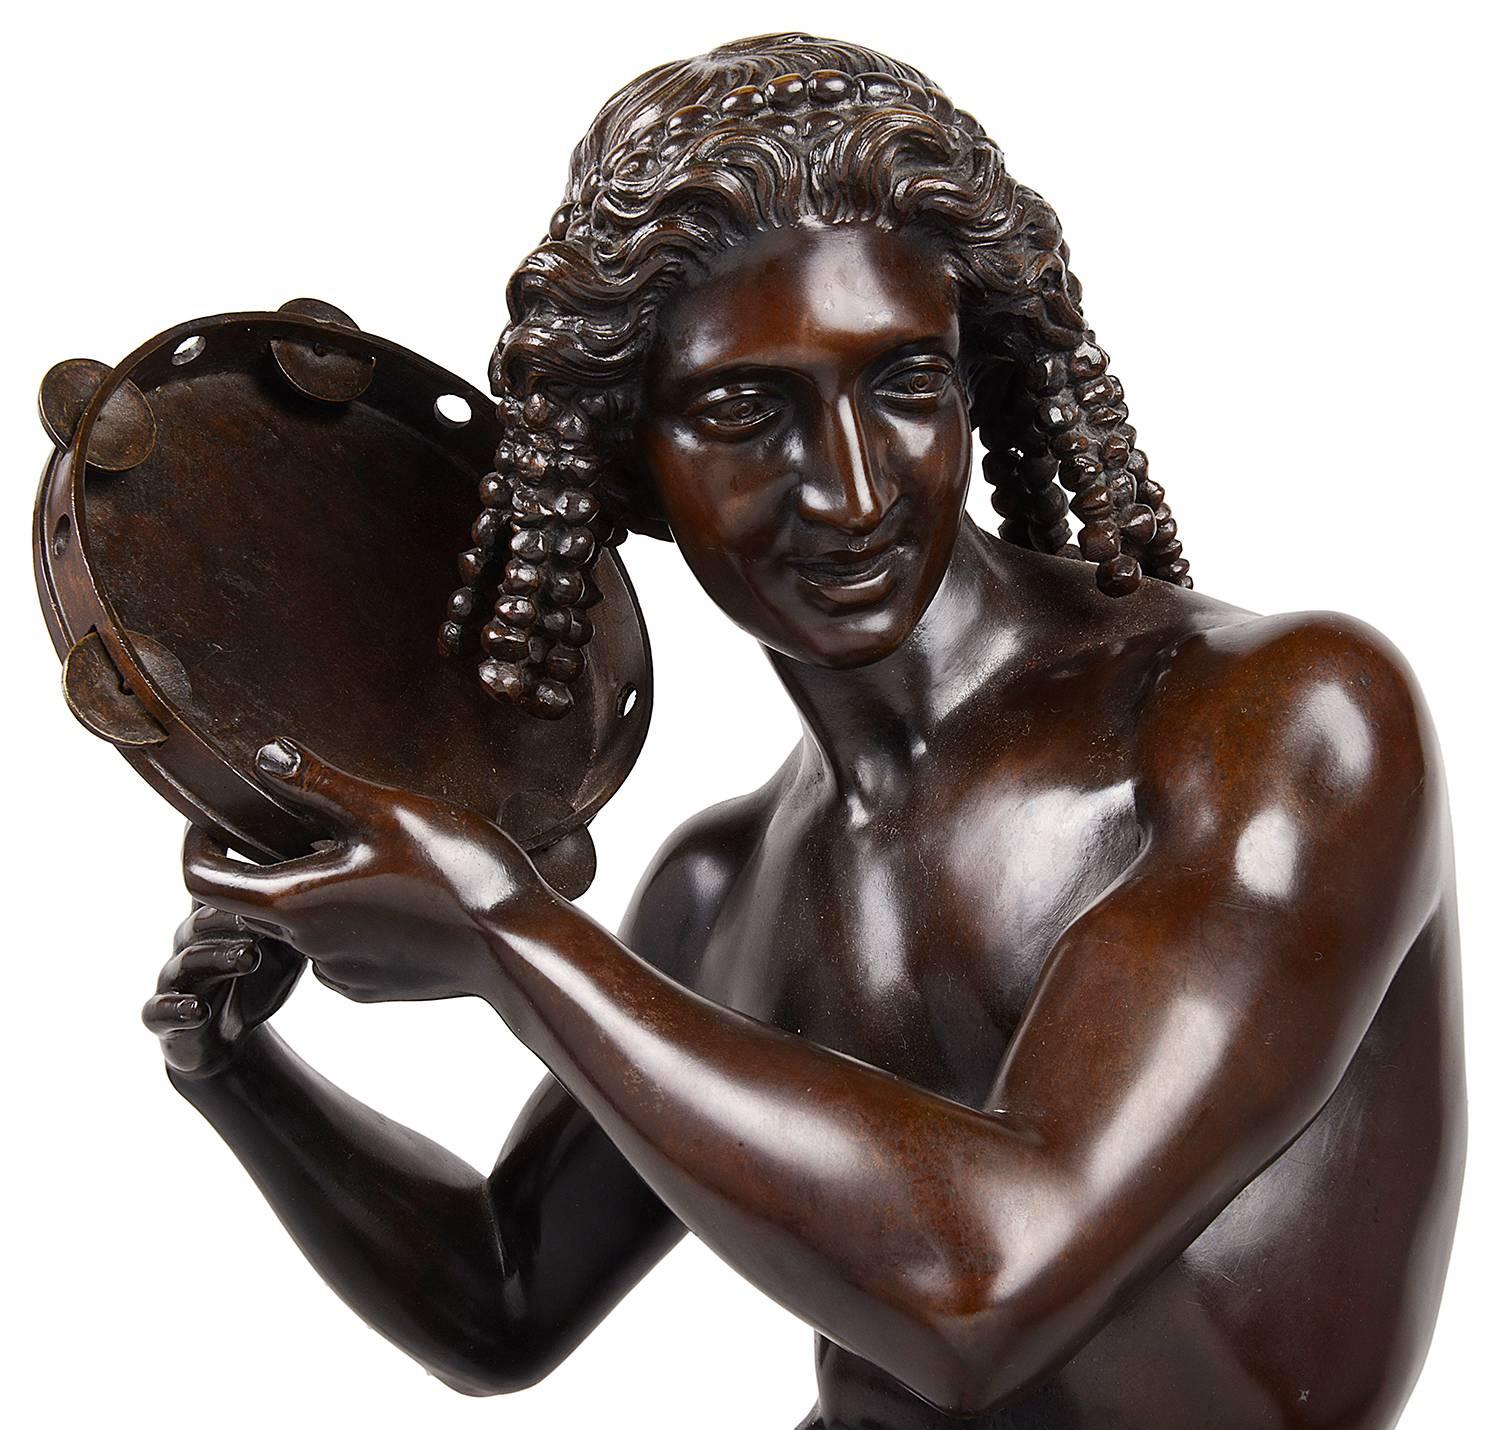 A large and impressive 19th century bronze statue of a Neapolitan dancer holding a tambourine. After Francisque-Joseph Duret.